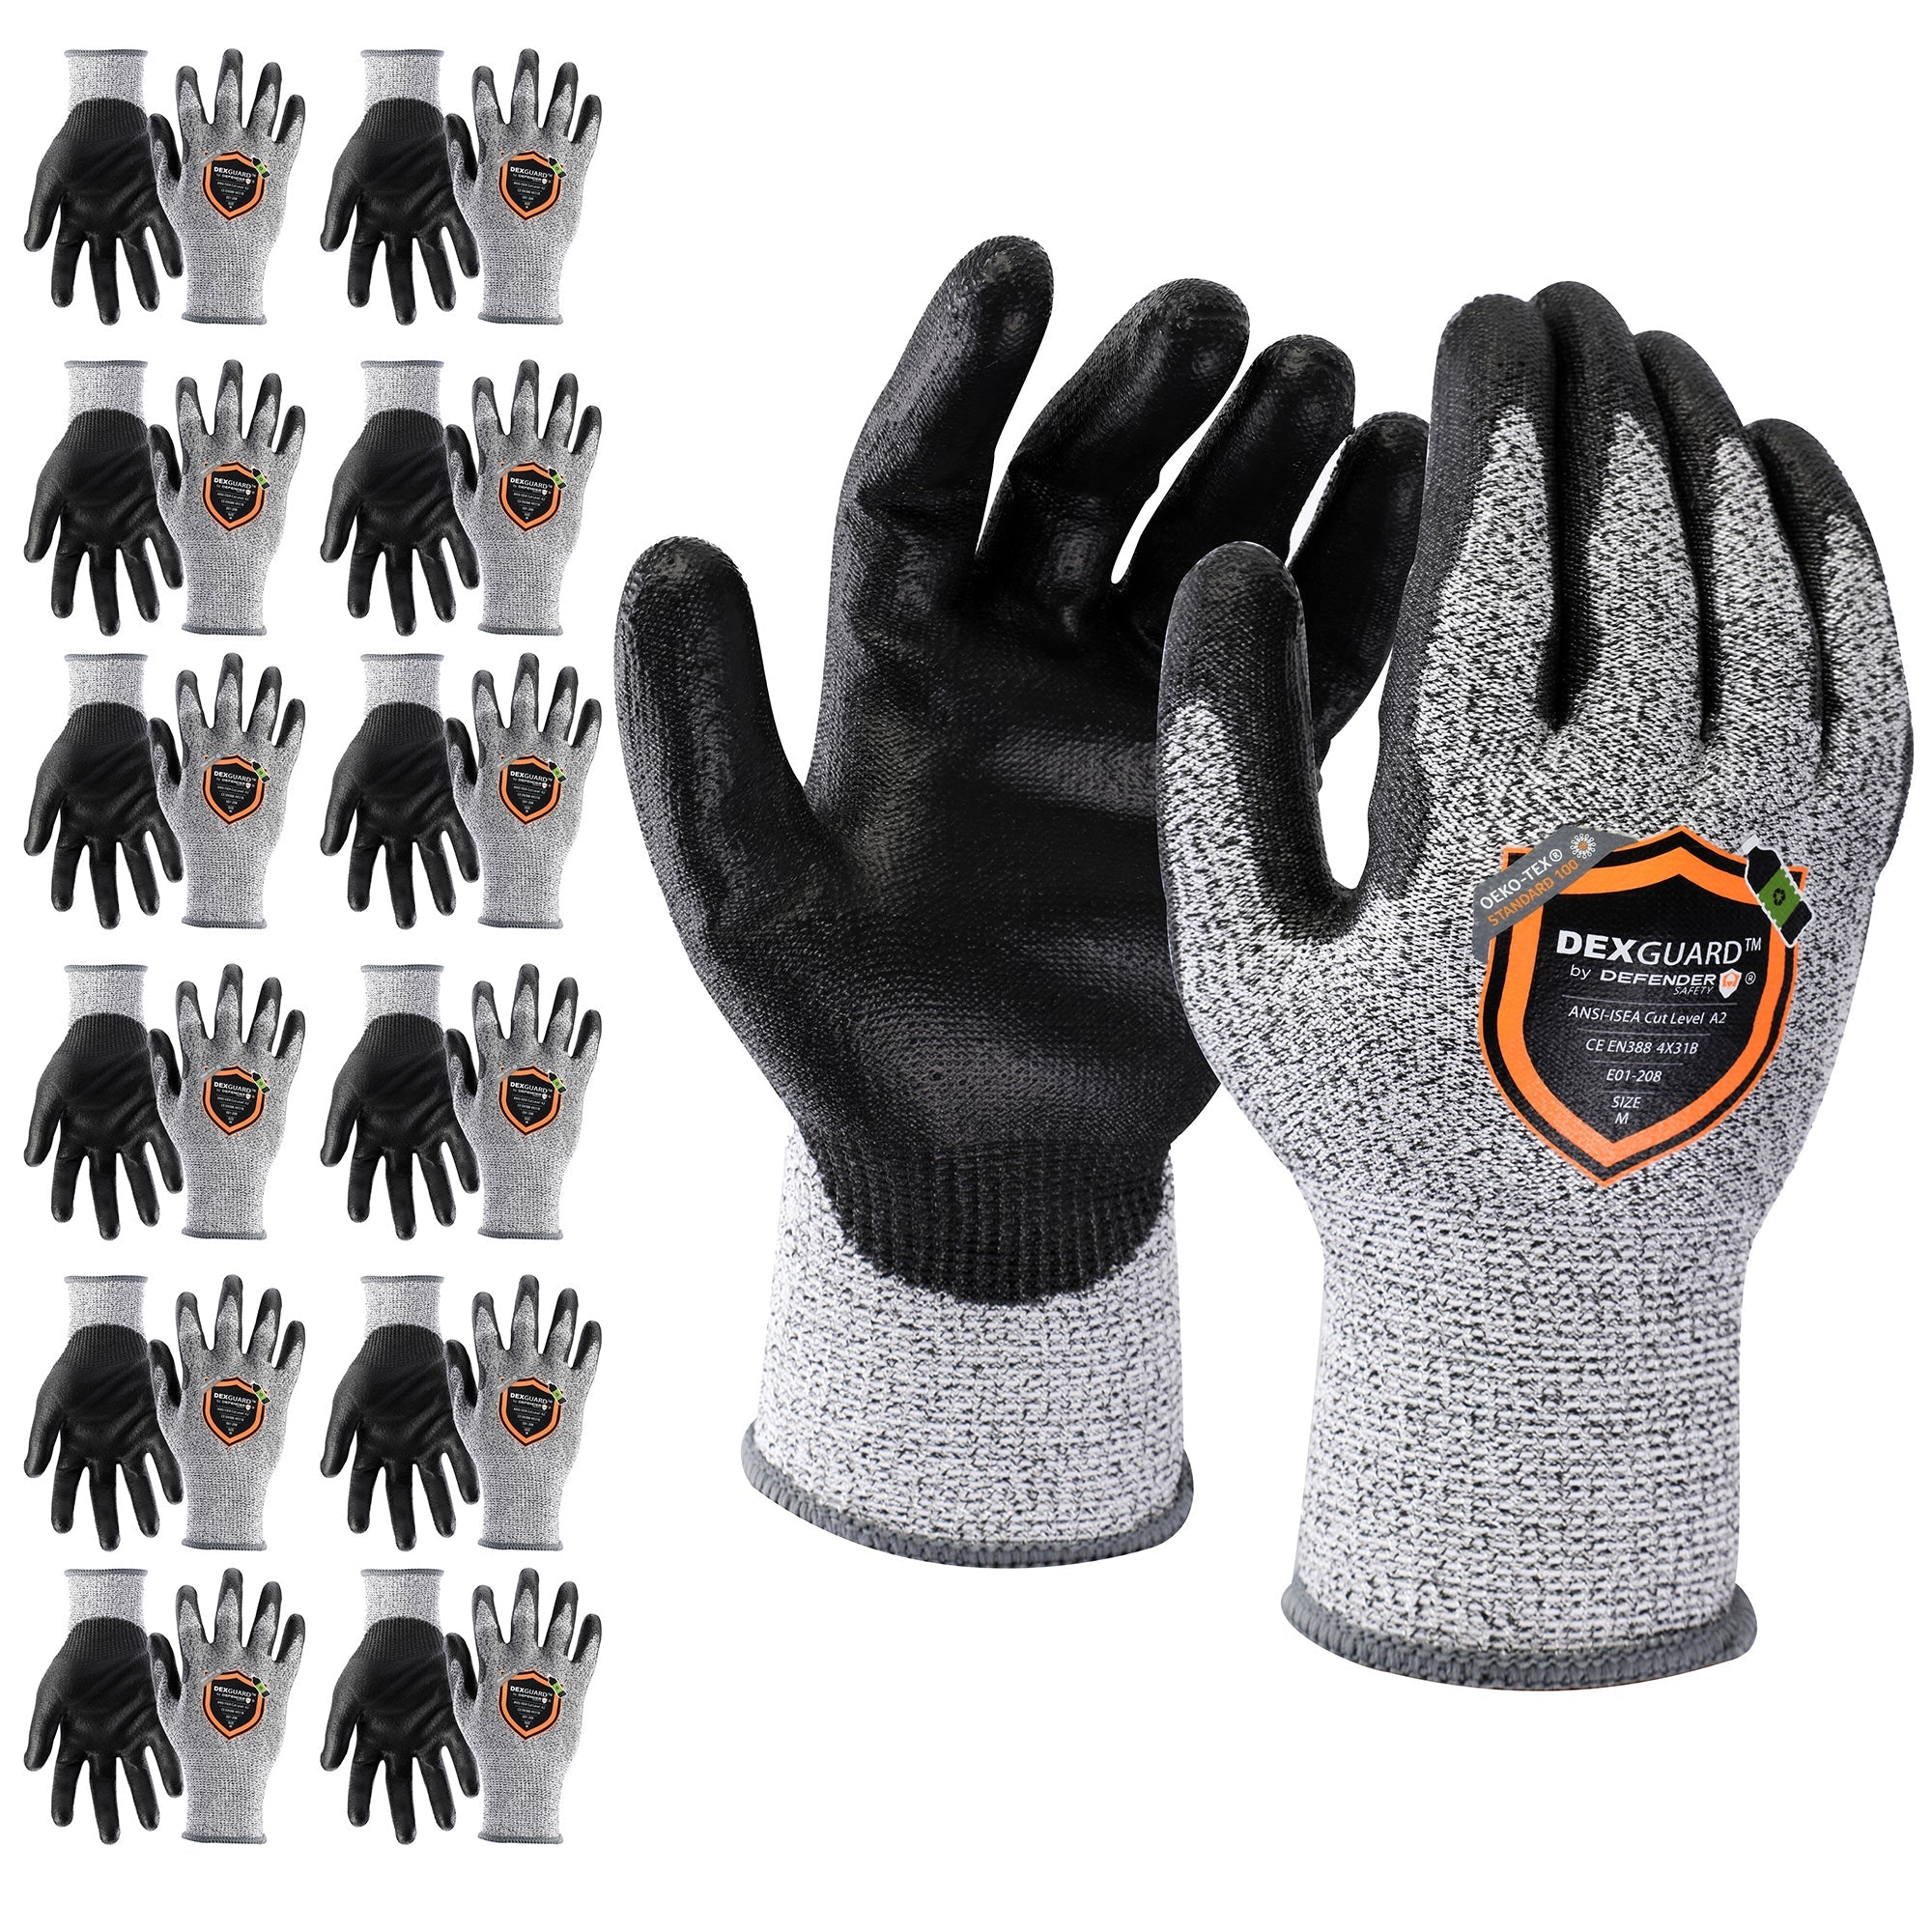 DEXGUARD A2 Cut Glove, 12 Pair Pack, Level 4 Abrasion Resistant, Polyurethane Coated Defender Safety, X-Large